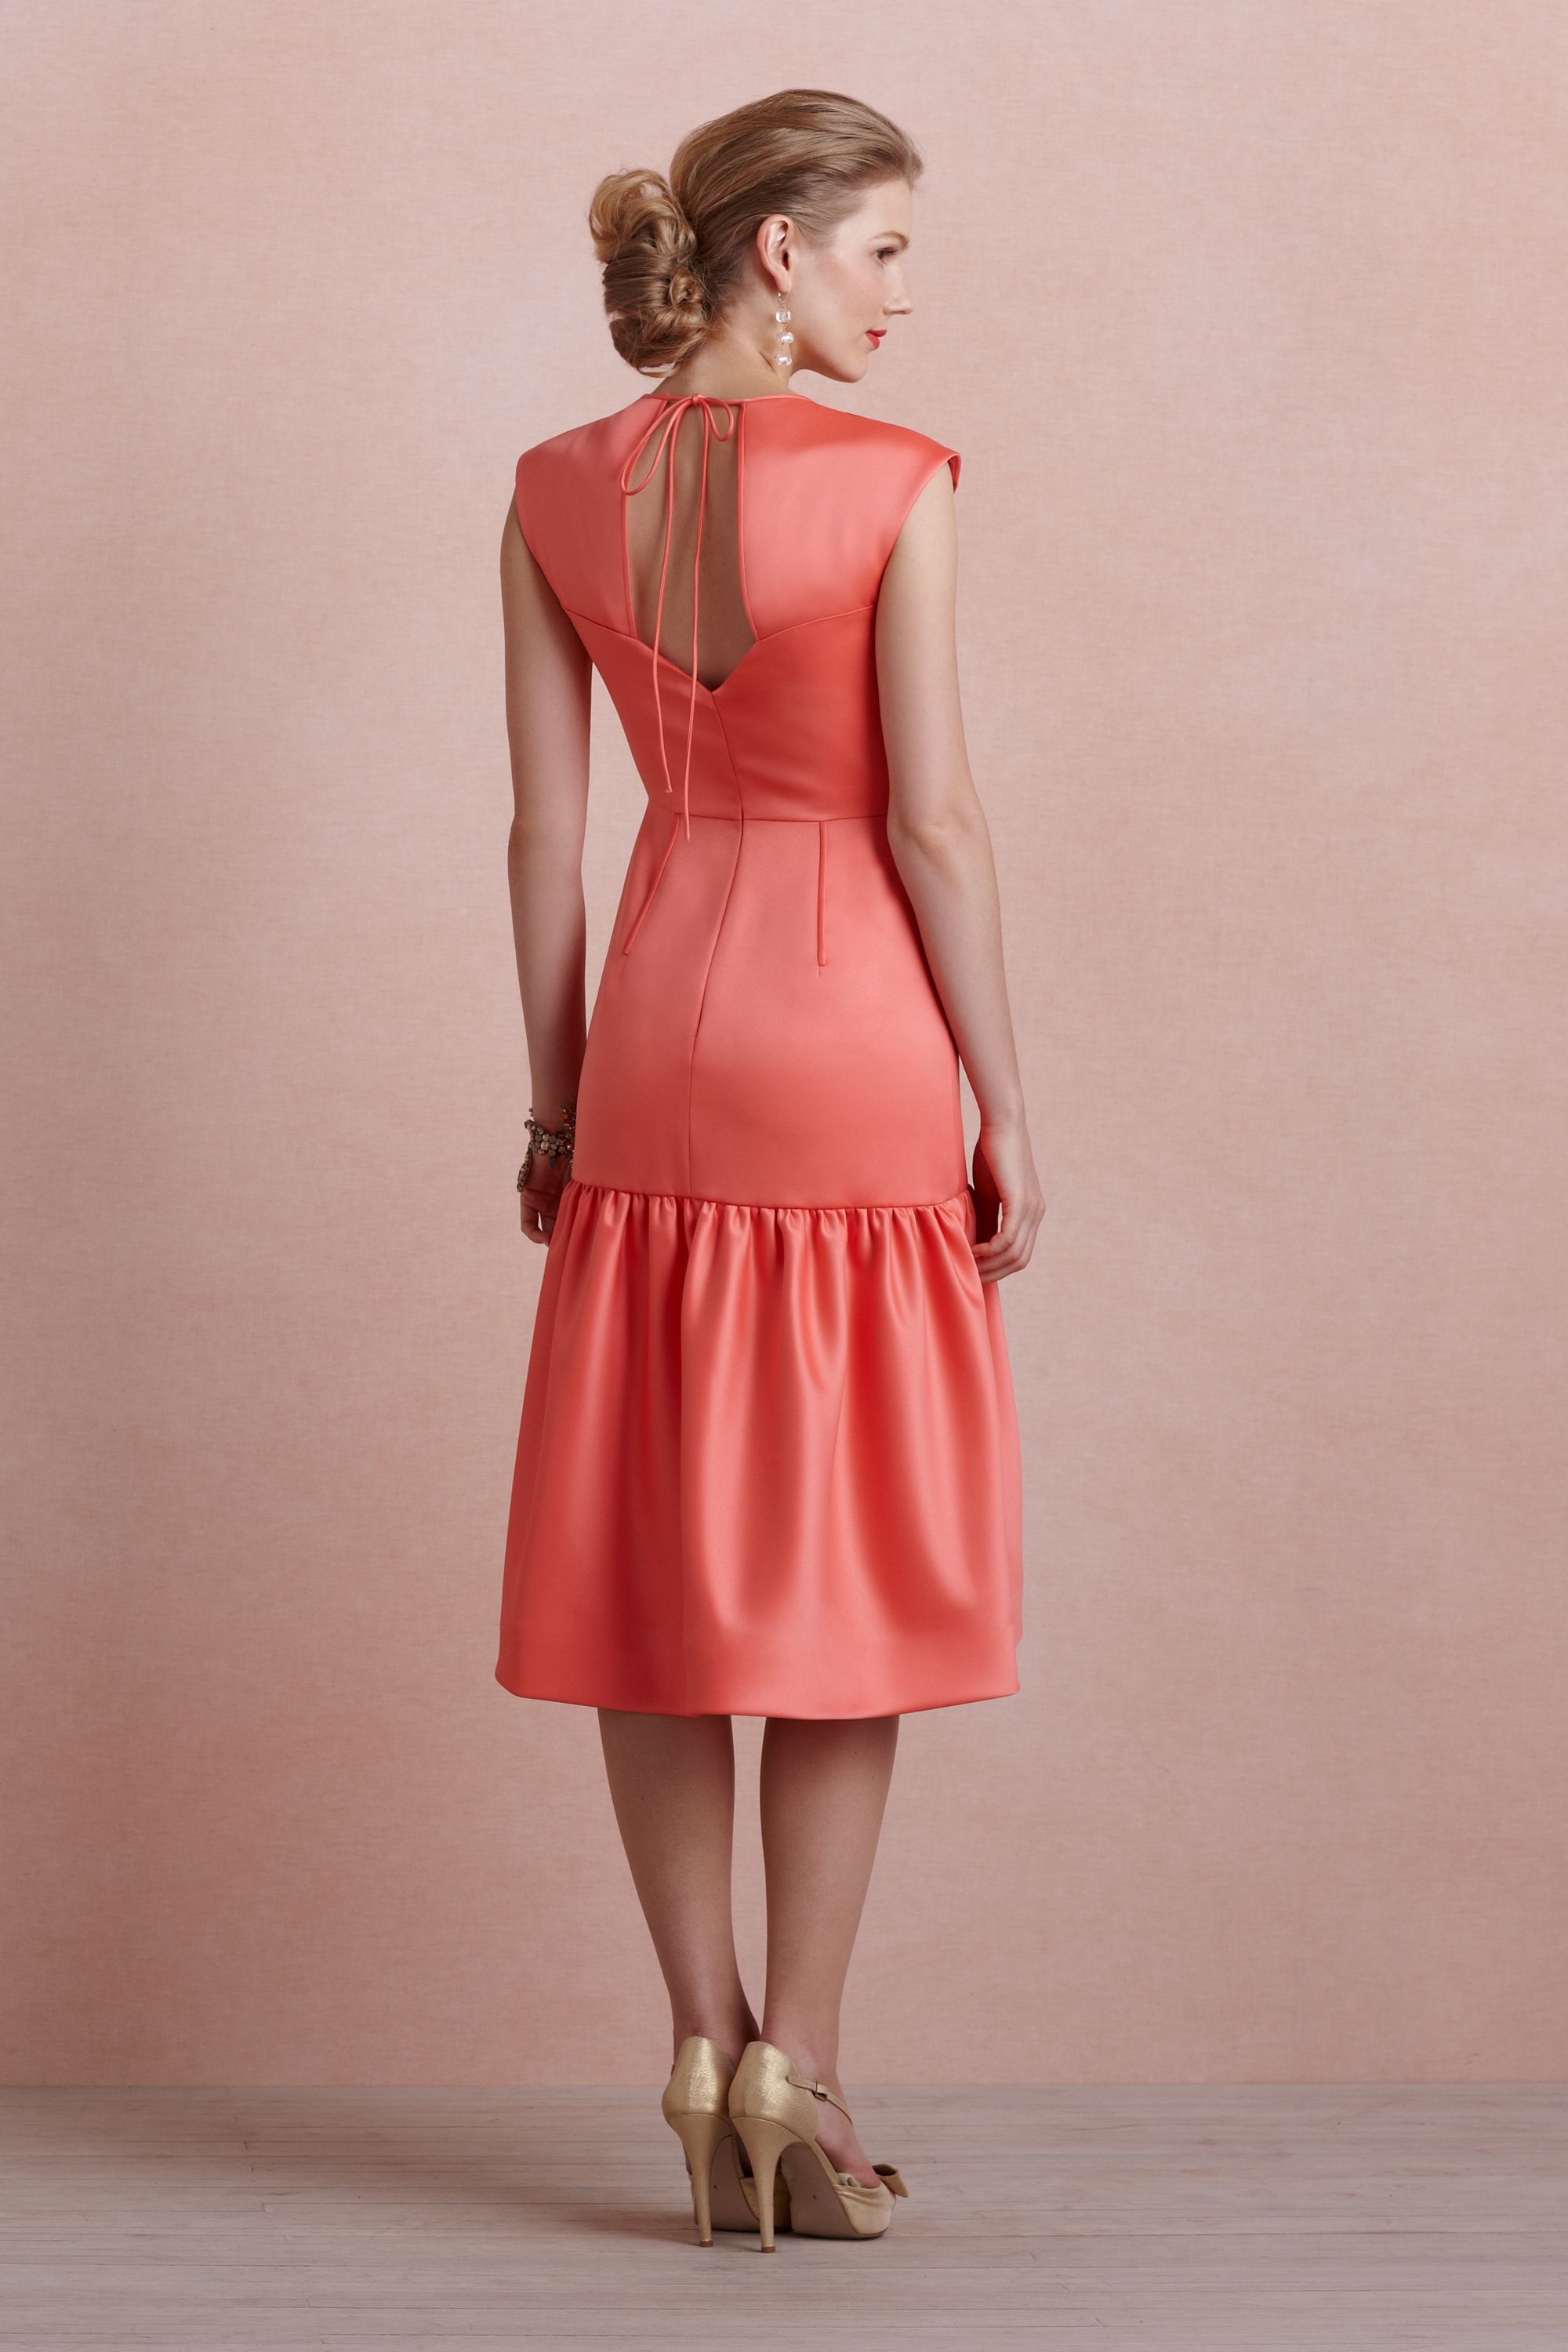 Coral Flounce Dress in Bridesmaids & Bridal Party | BHLDN